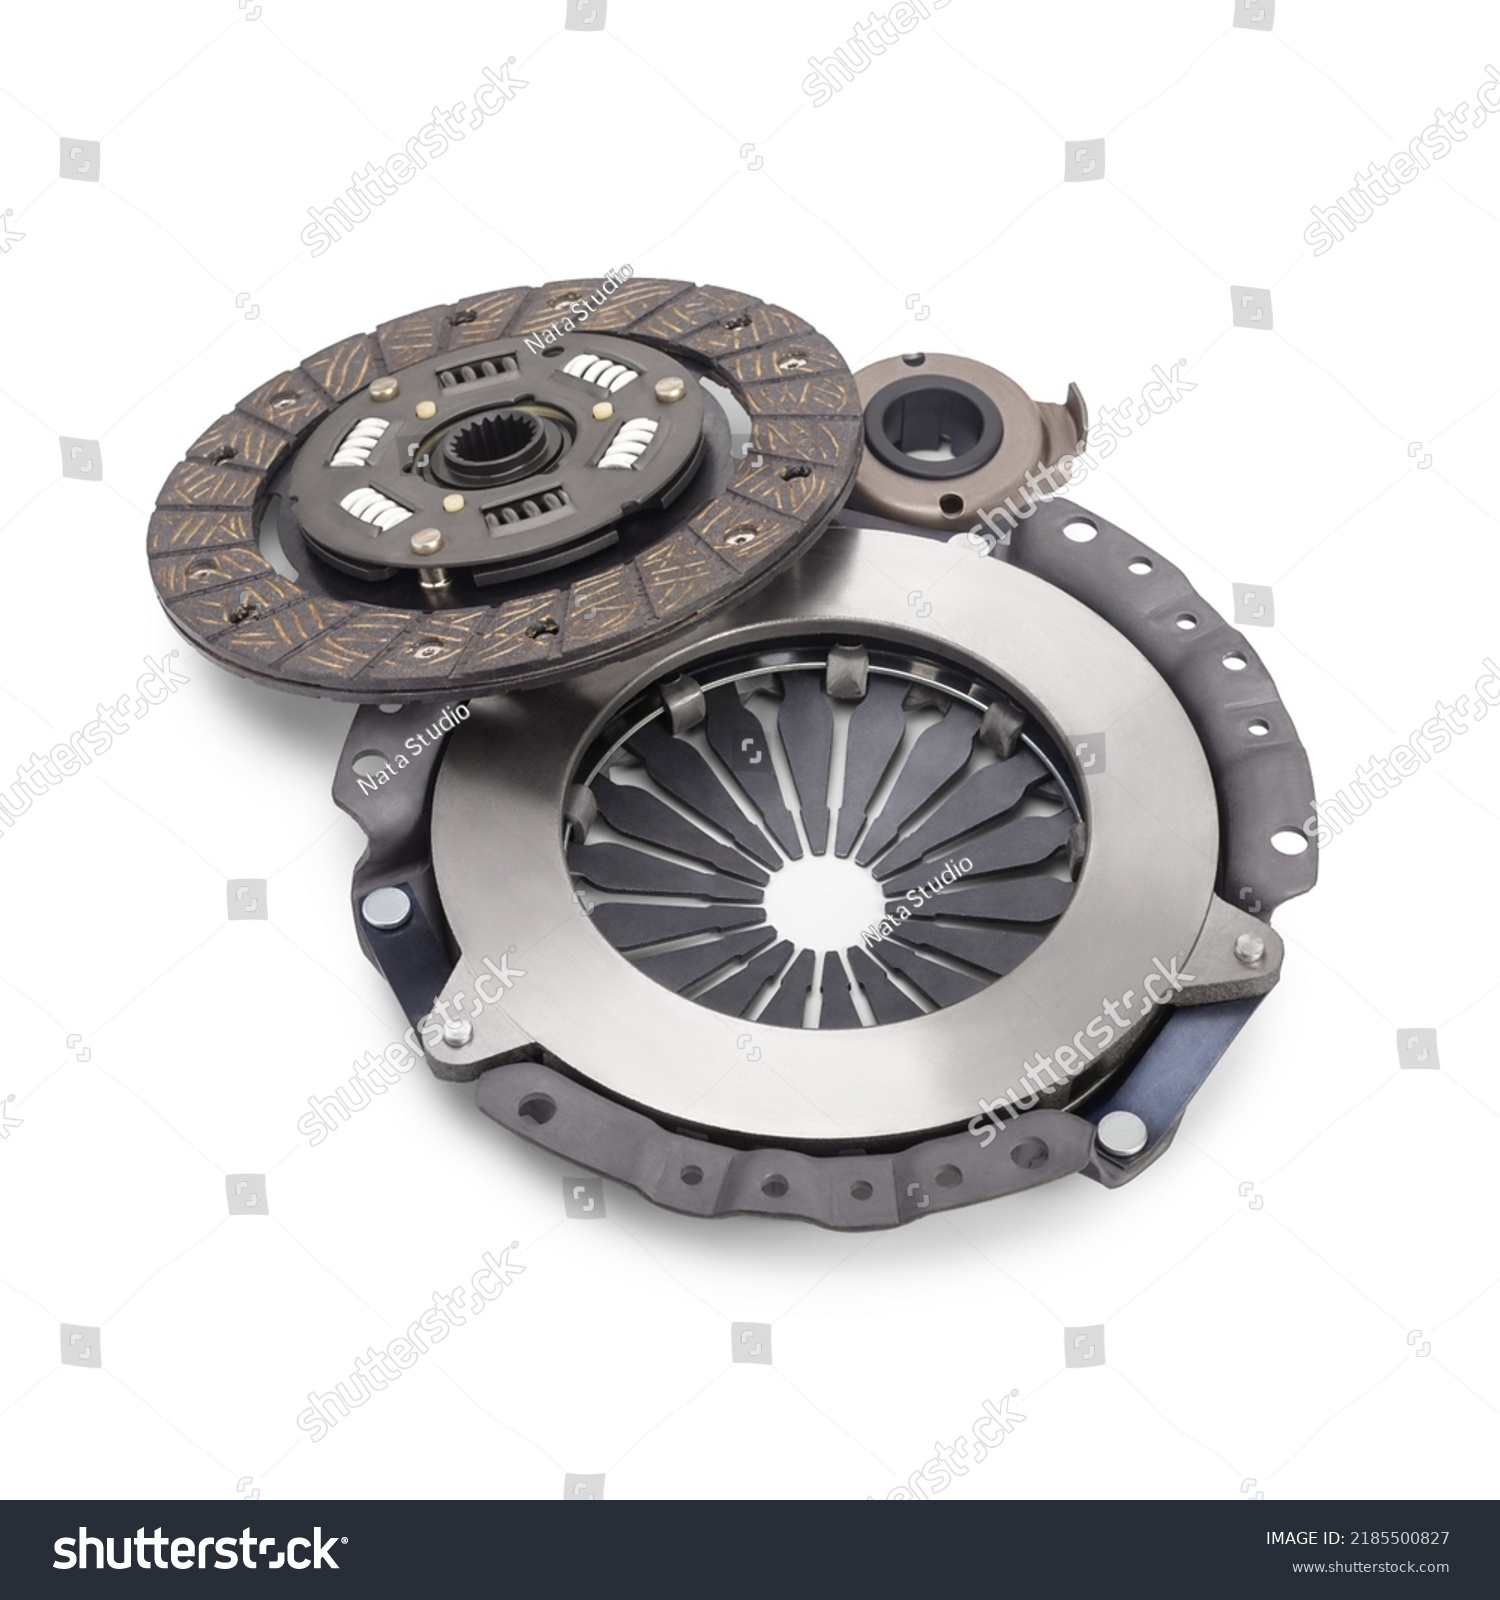 Clutch basket and disc of manual gearbox car isolated on white background. Car clutch repair kit. Automotive spare parts. #2185500827